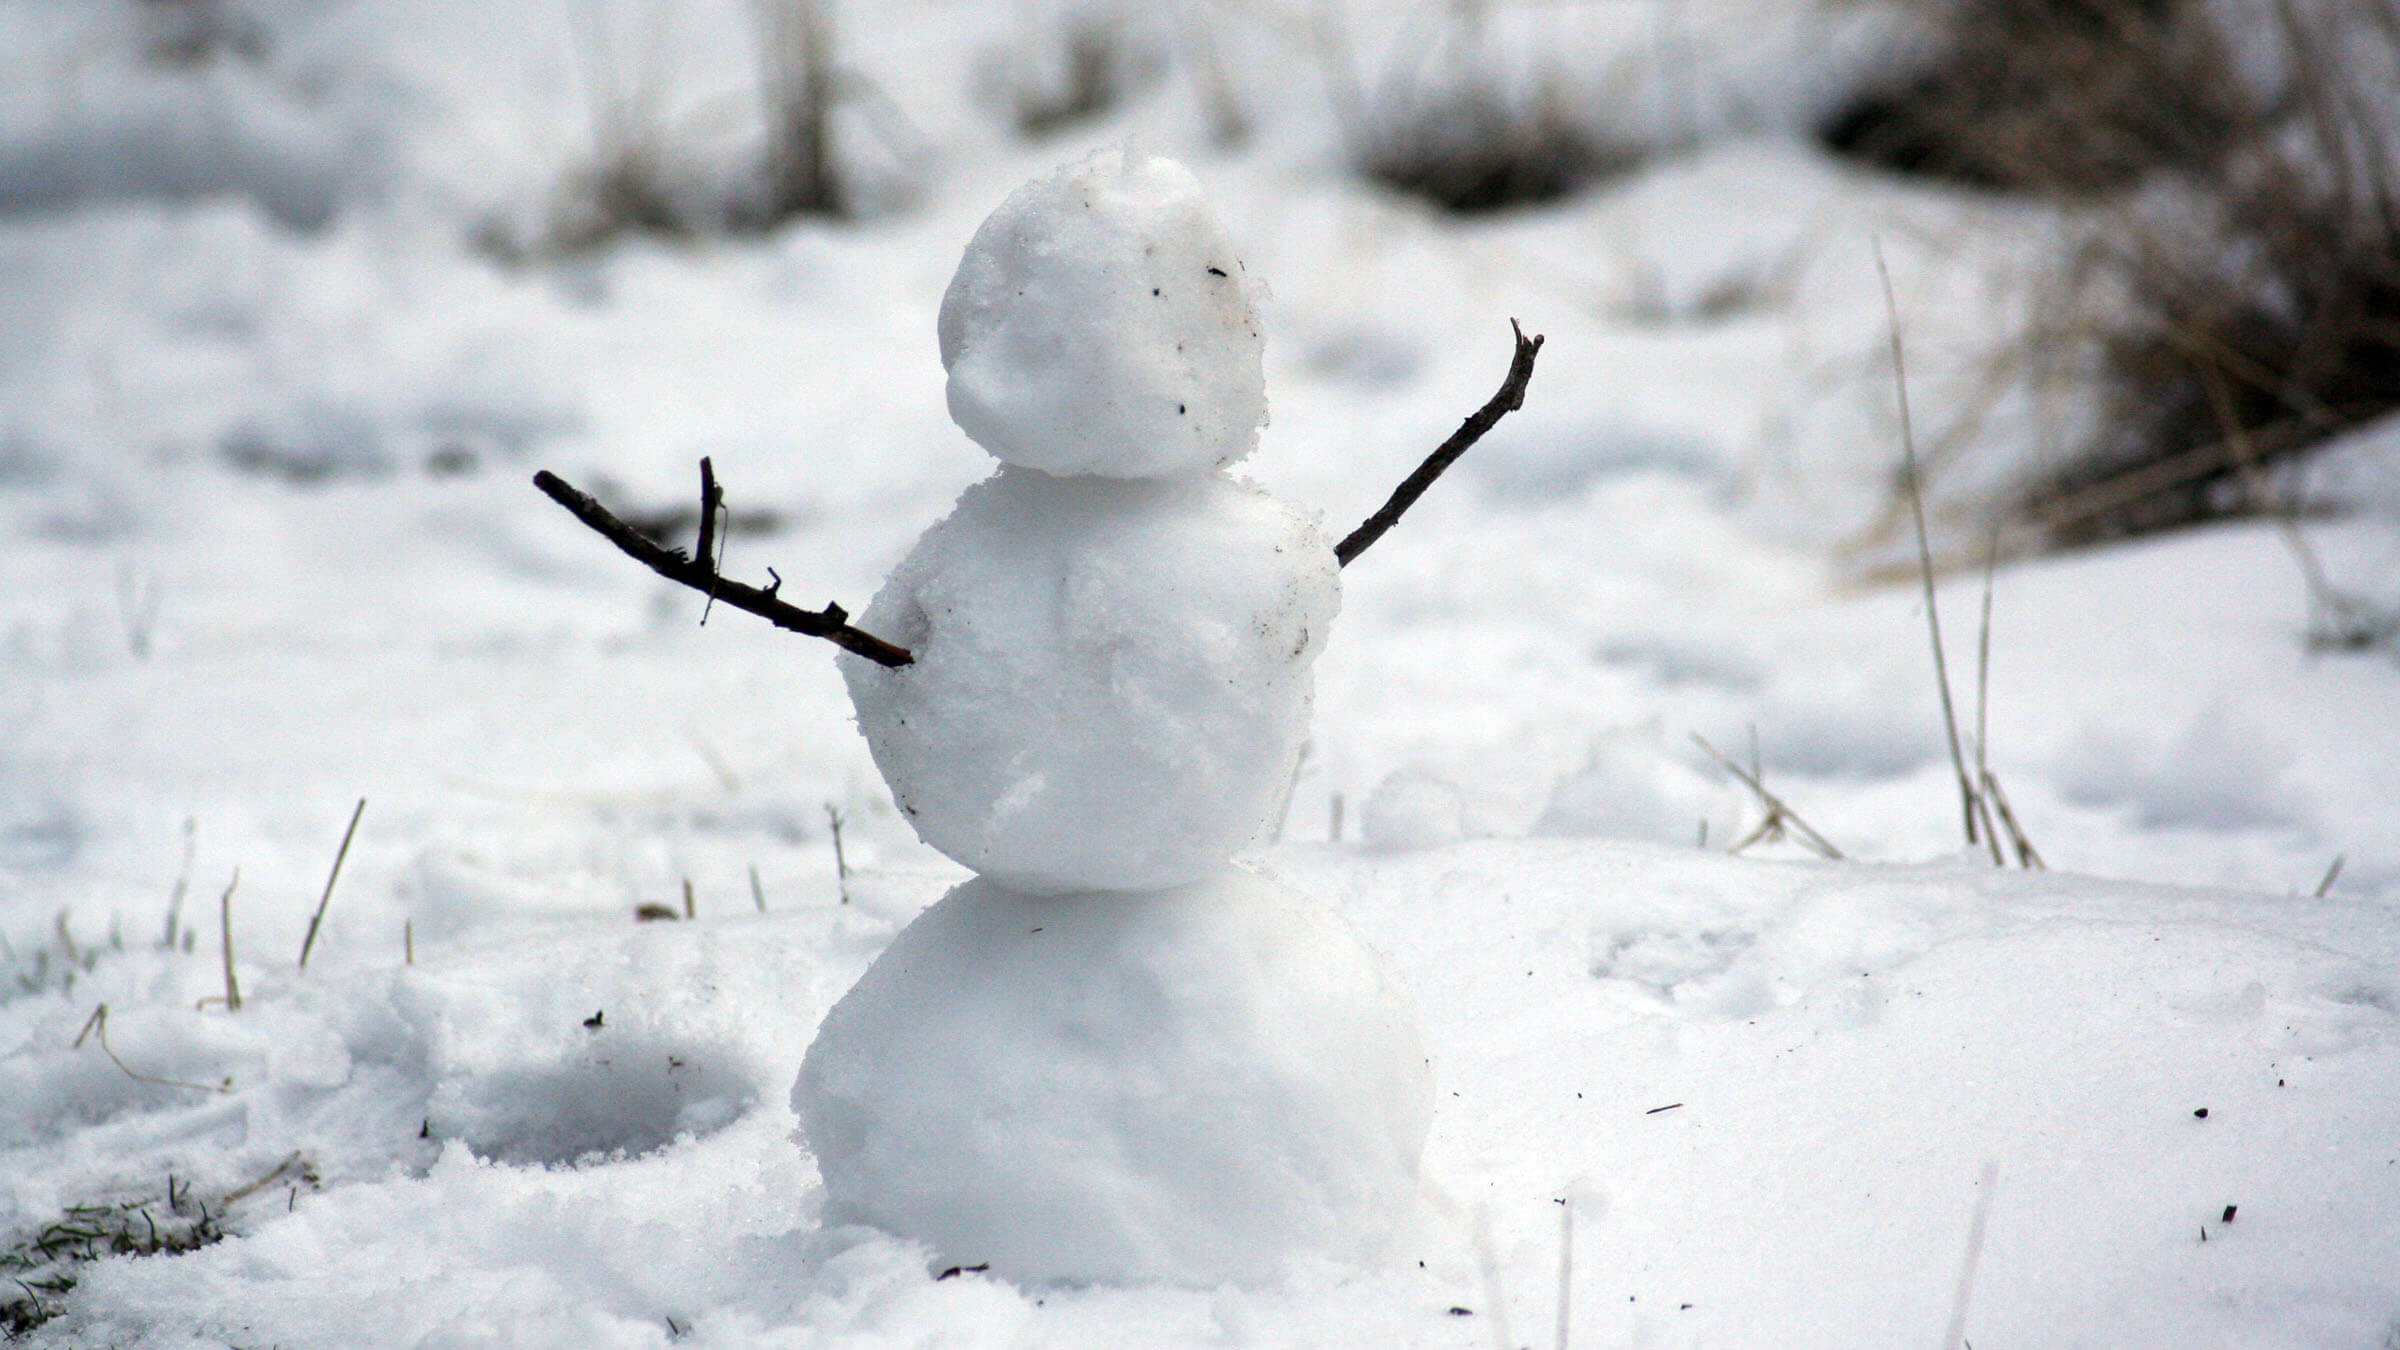 How to build a snowman: 5 tips for success